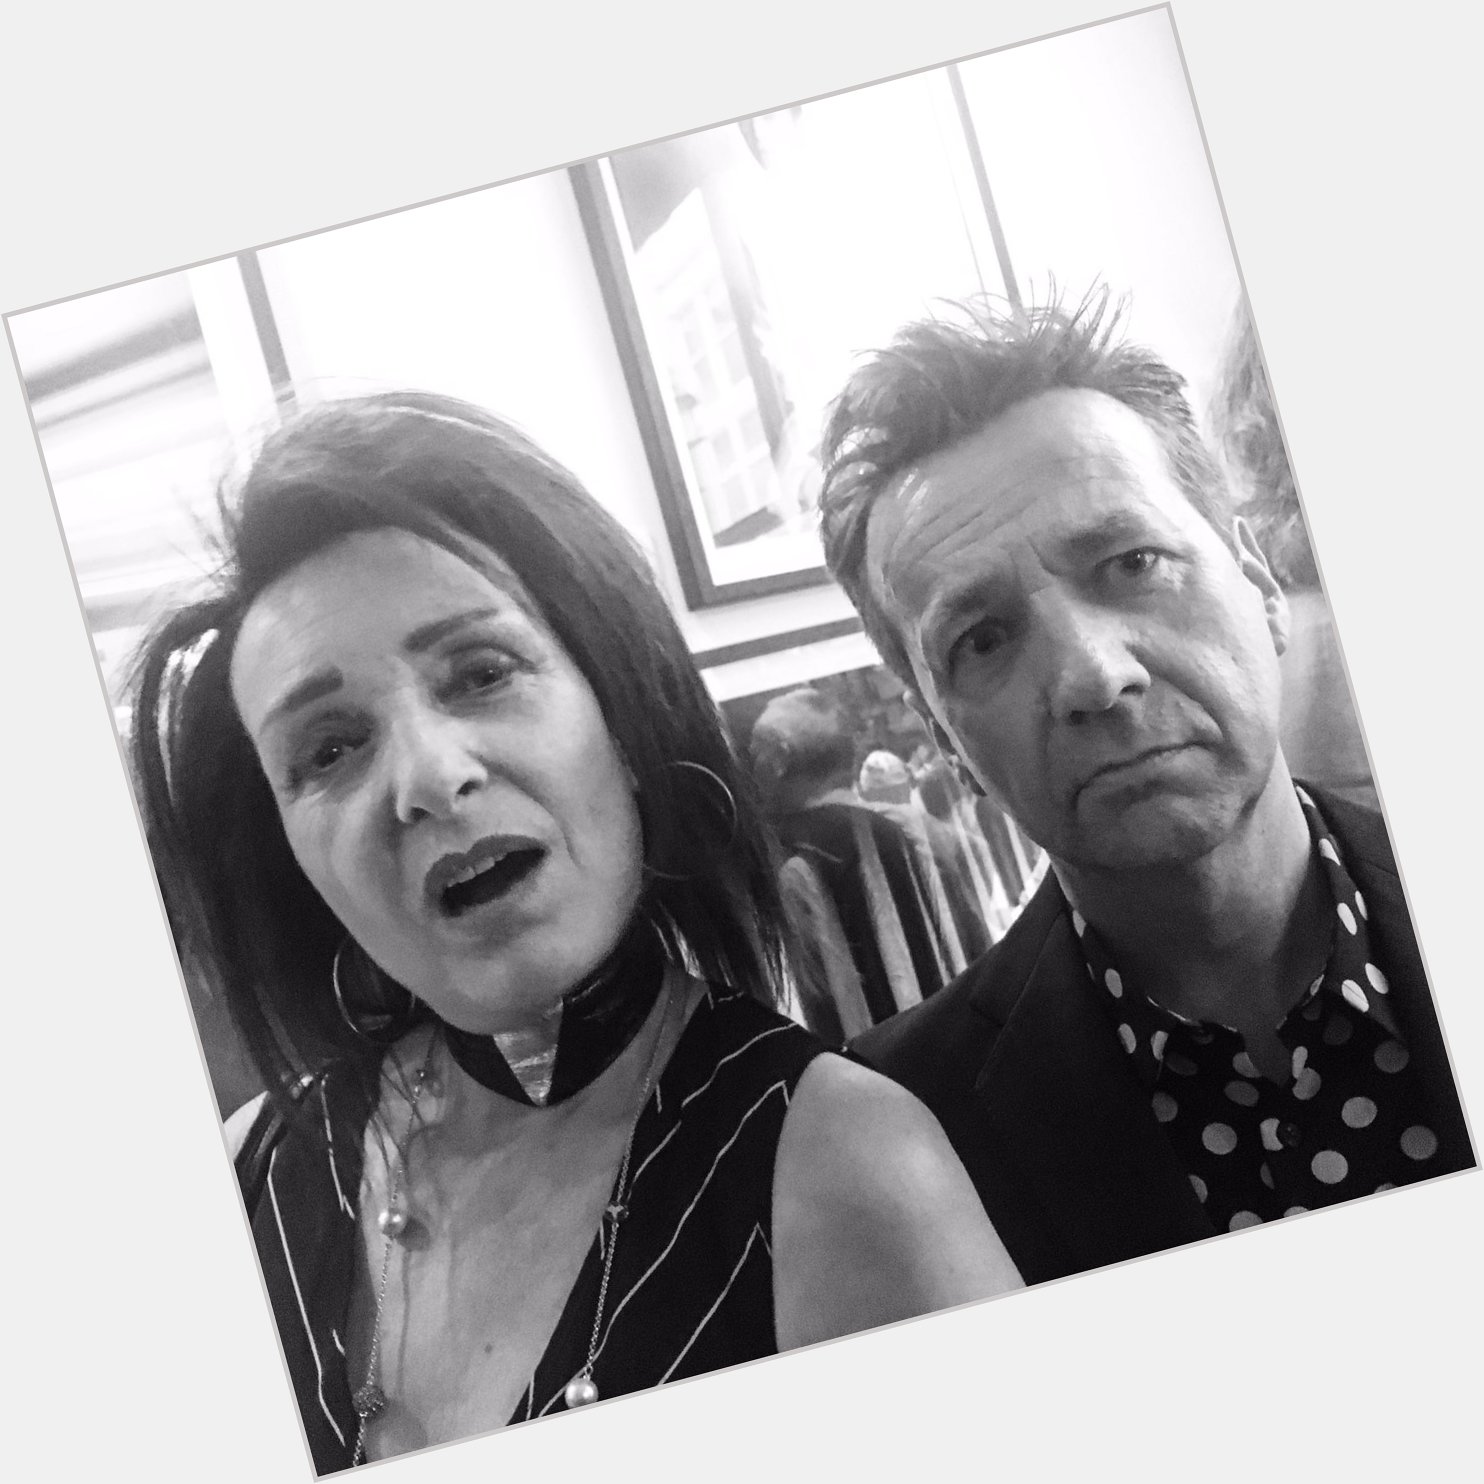 Happy birthday Siouxsie Sioux and thanks for the photo (what was I like) 